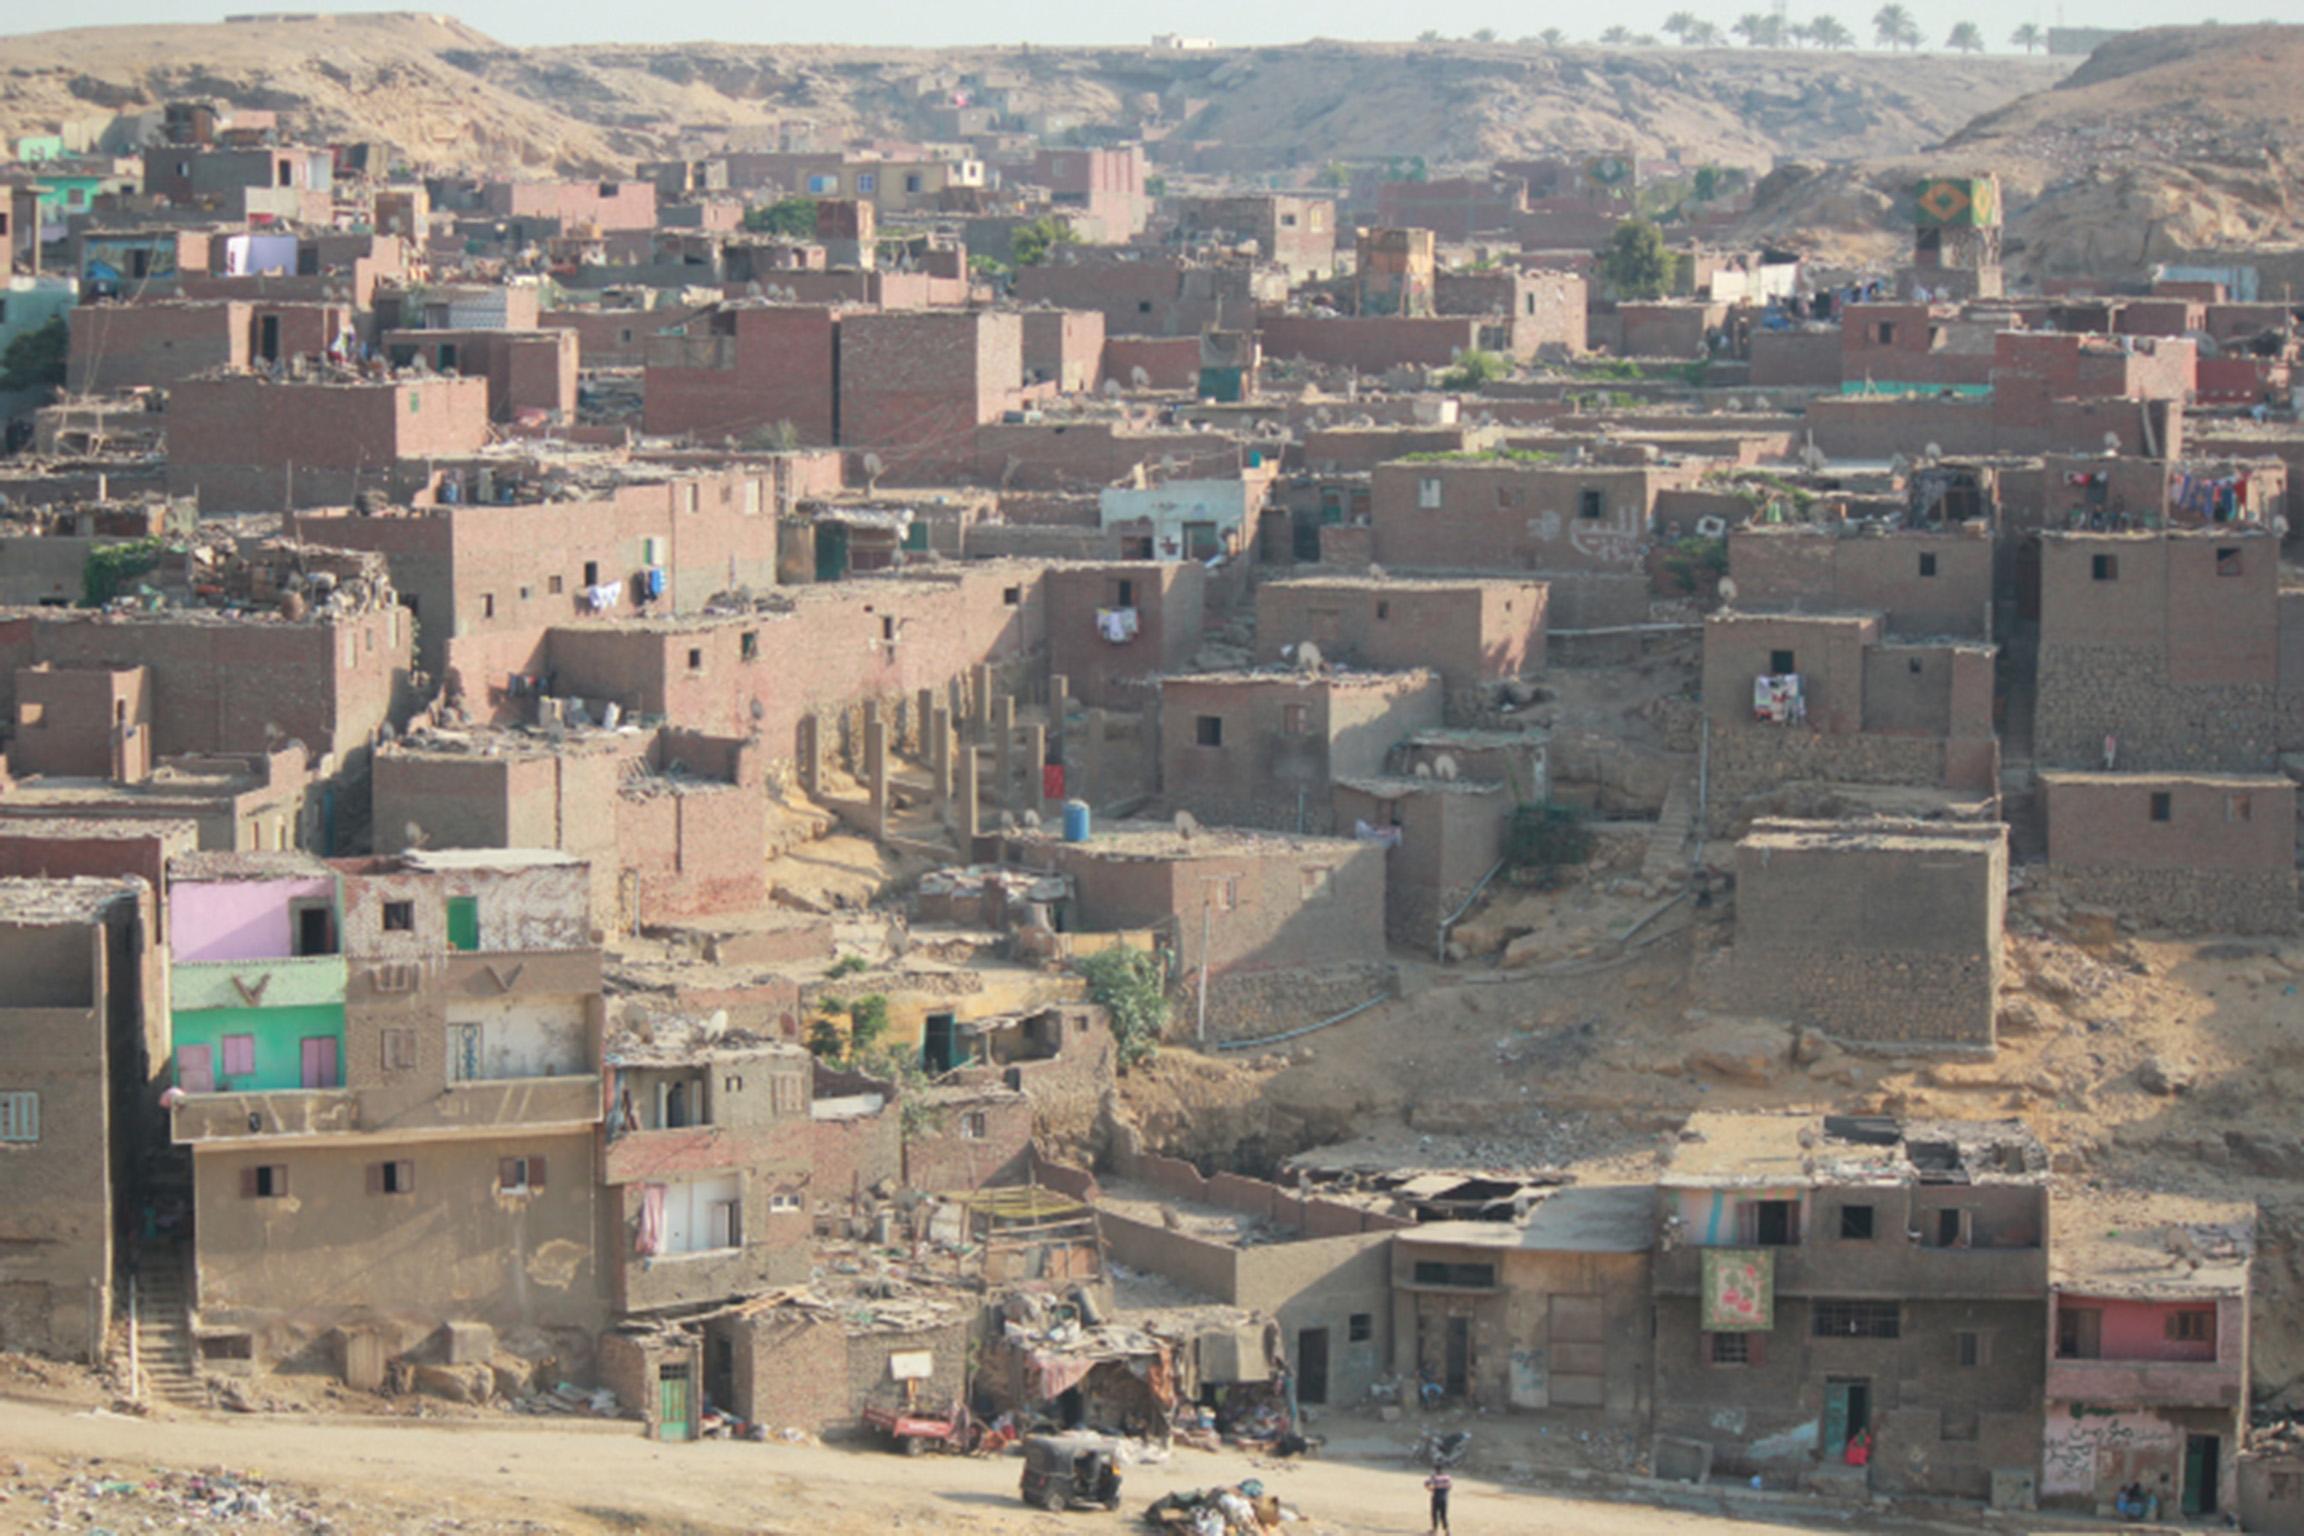 Al Doweqa, in the slum settlement of Manshiyat Naser. Many of its dwellings are inadequately built, and collapses are commonplace